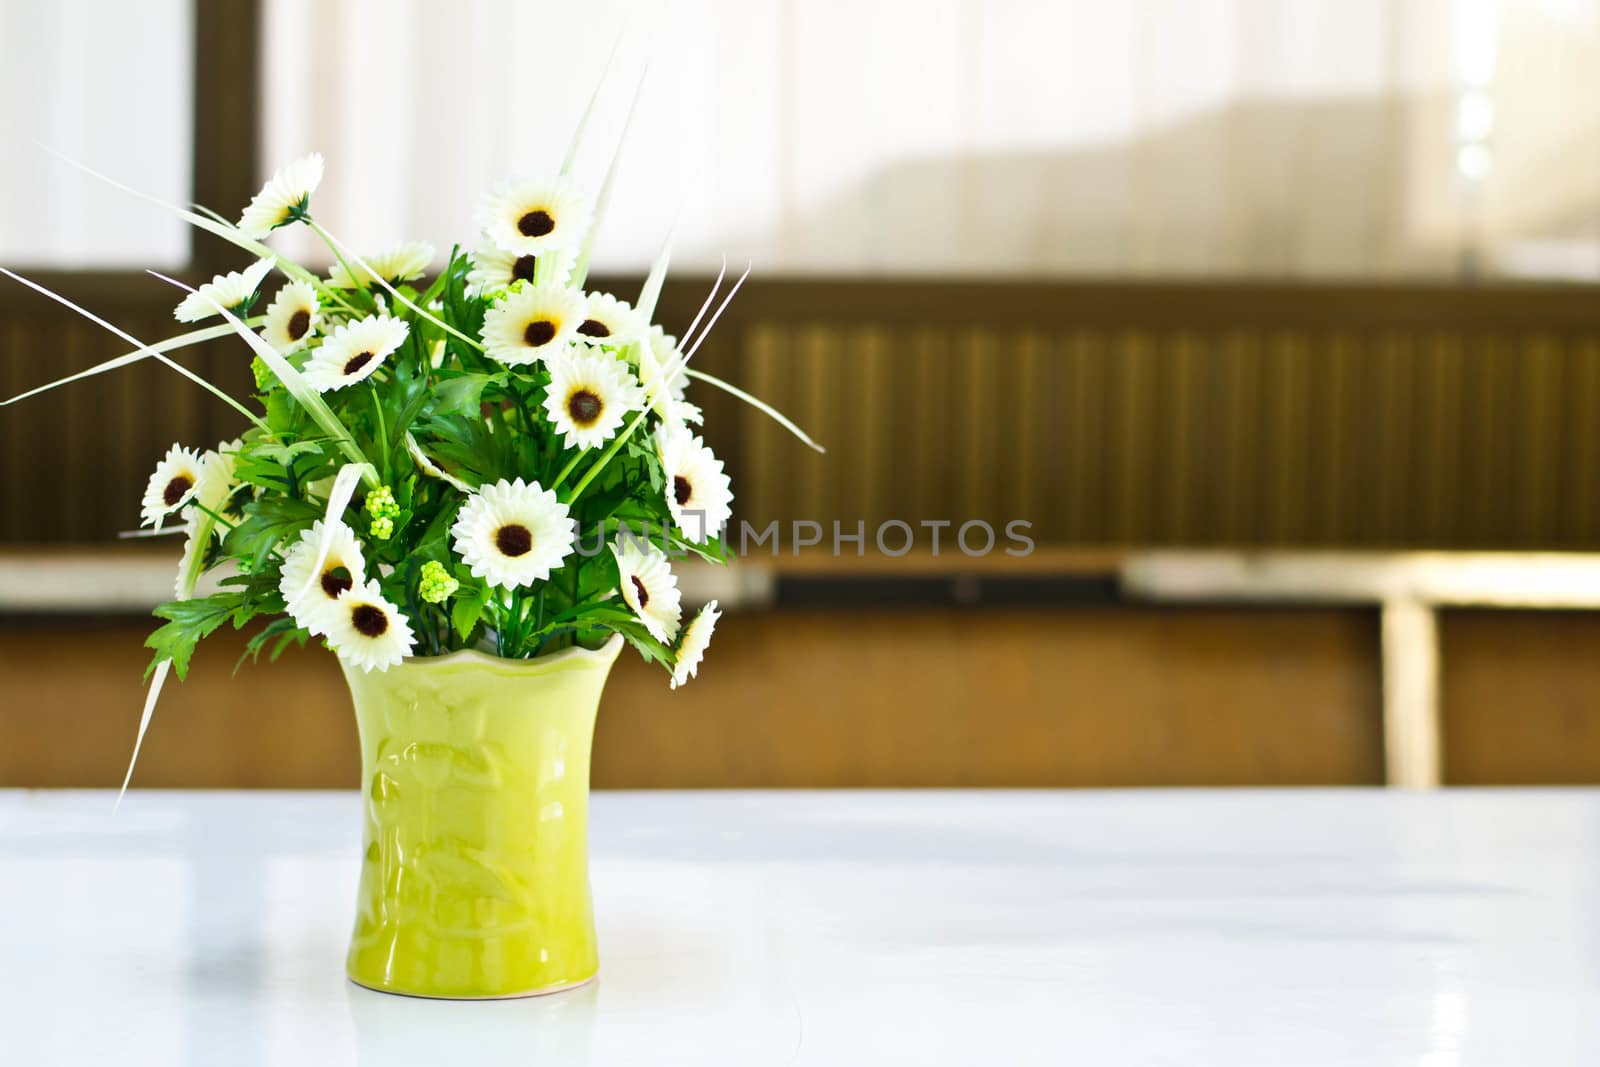  Beautiful flower in a vase on wooden table